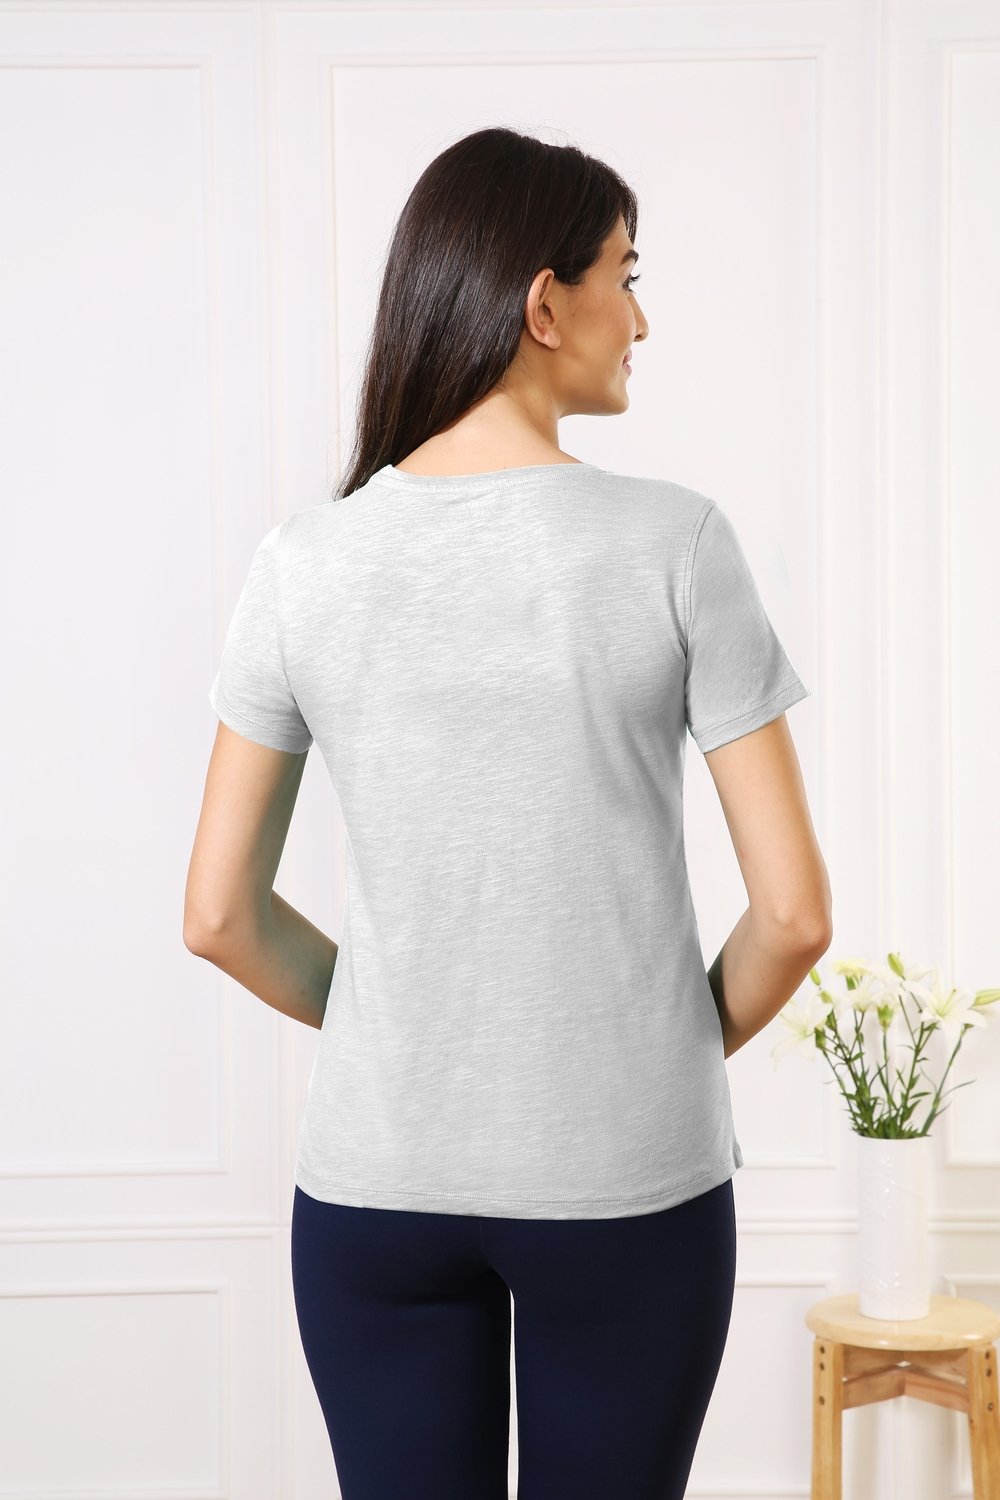 Classic Cotton Every day Wear Grey t-shirt tops for Women - Stilento